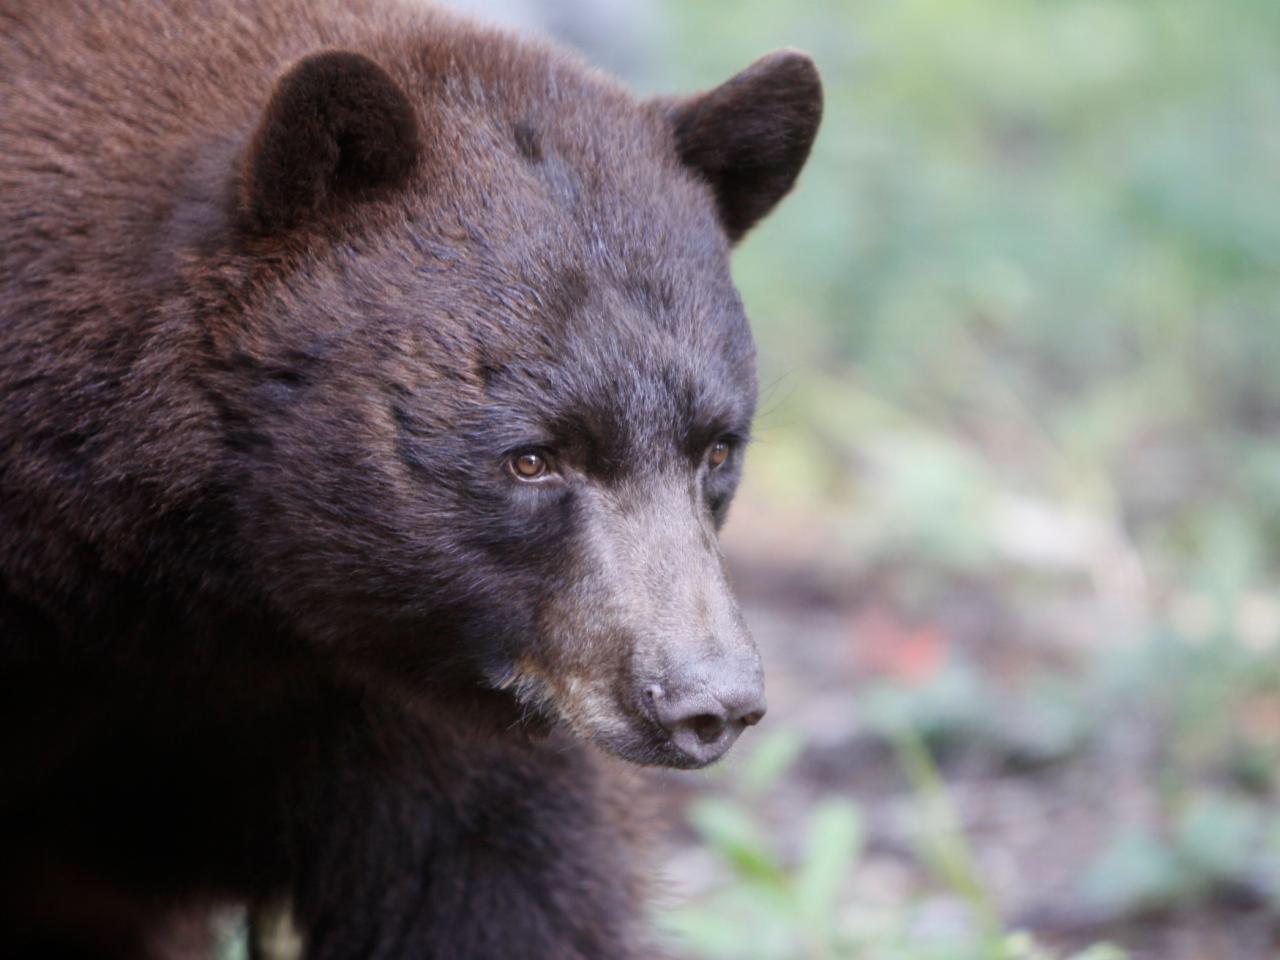 Saving the black bears of the West, Nature and Wildlife